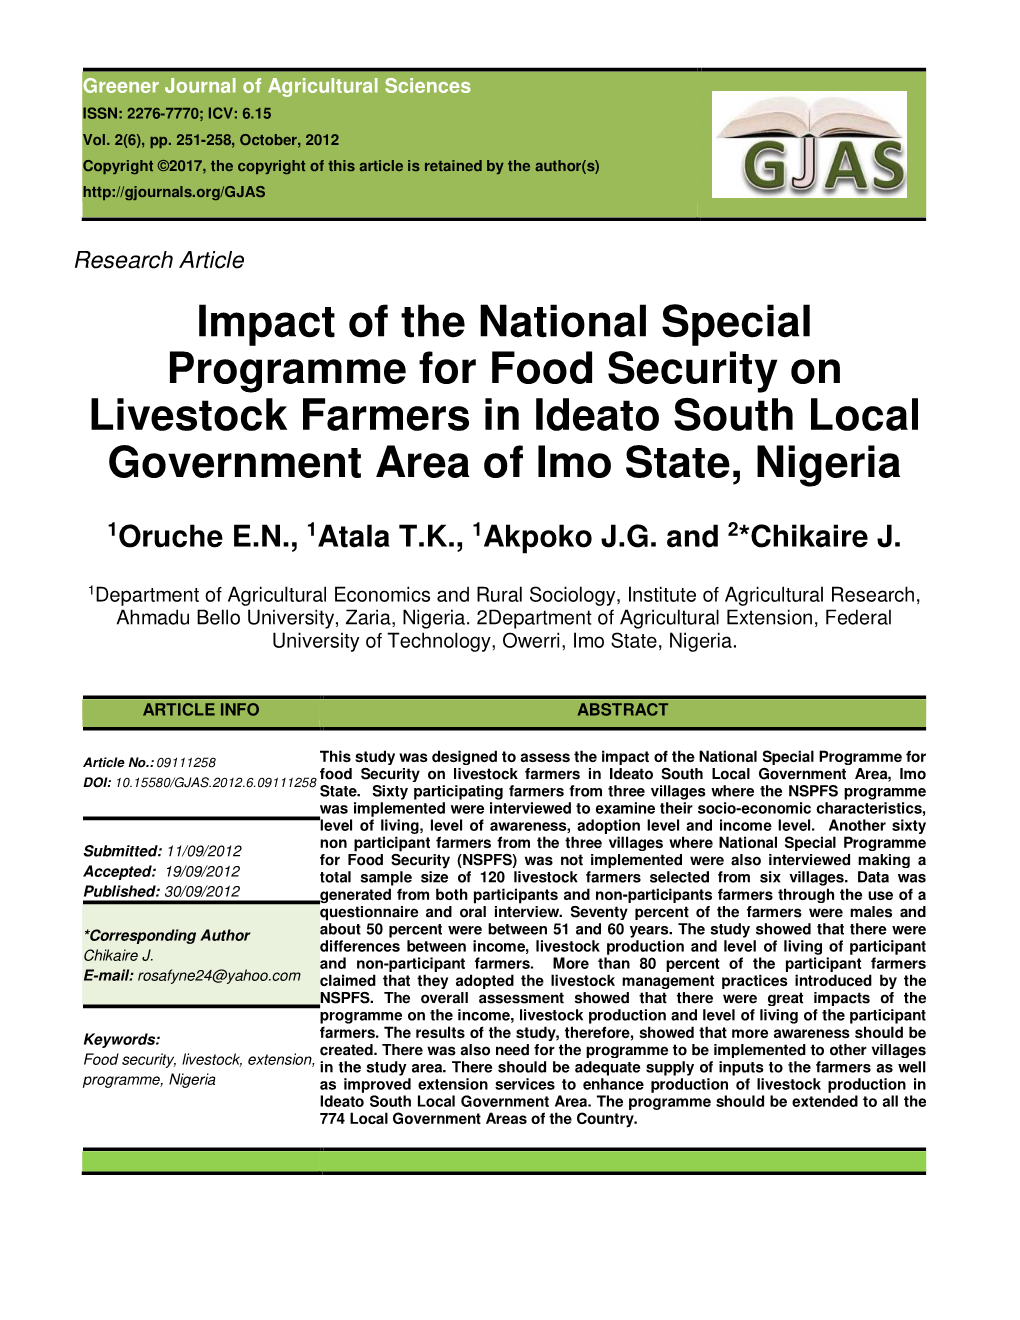 Impact of the National Special Programme for Food Security on Livestock Farmers in Ideato South Local Government Area of Imo State, Nigeria